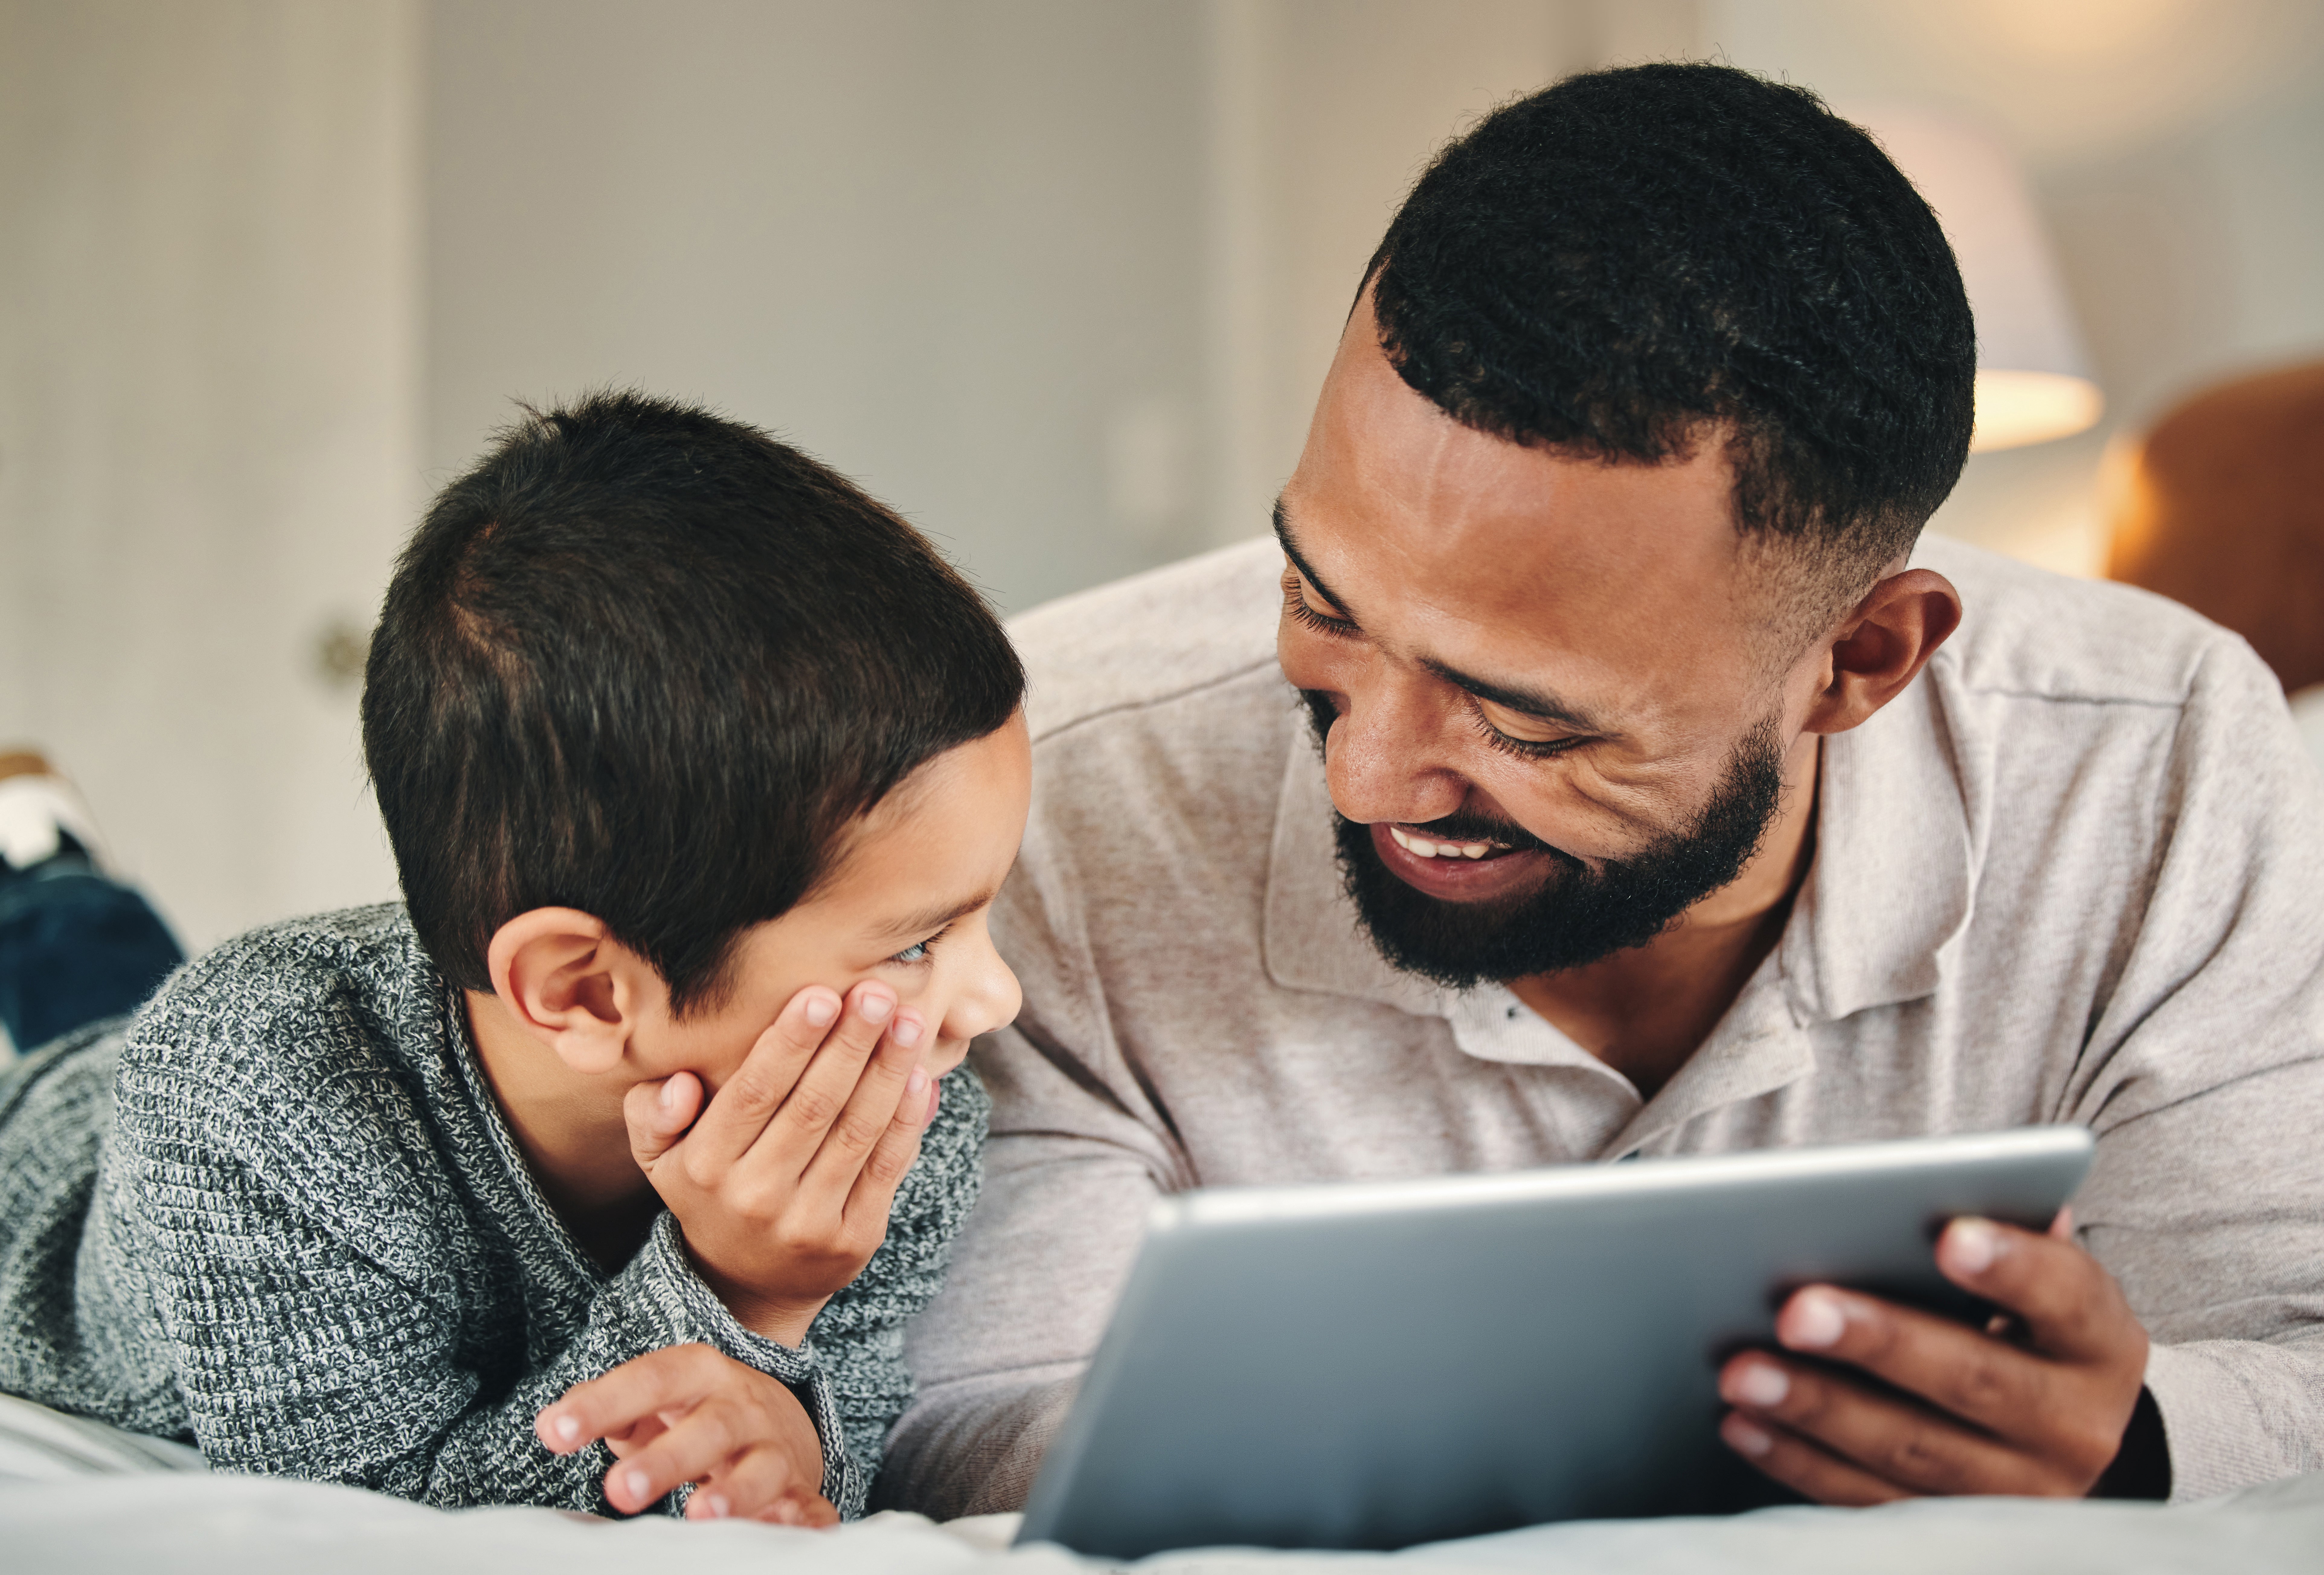 Father and son learning on tablet together